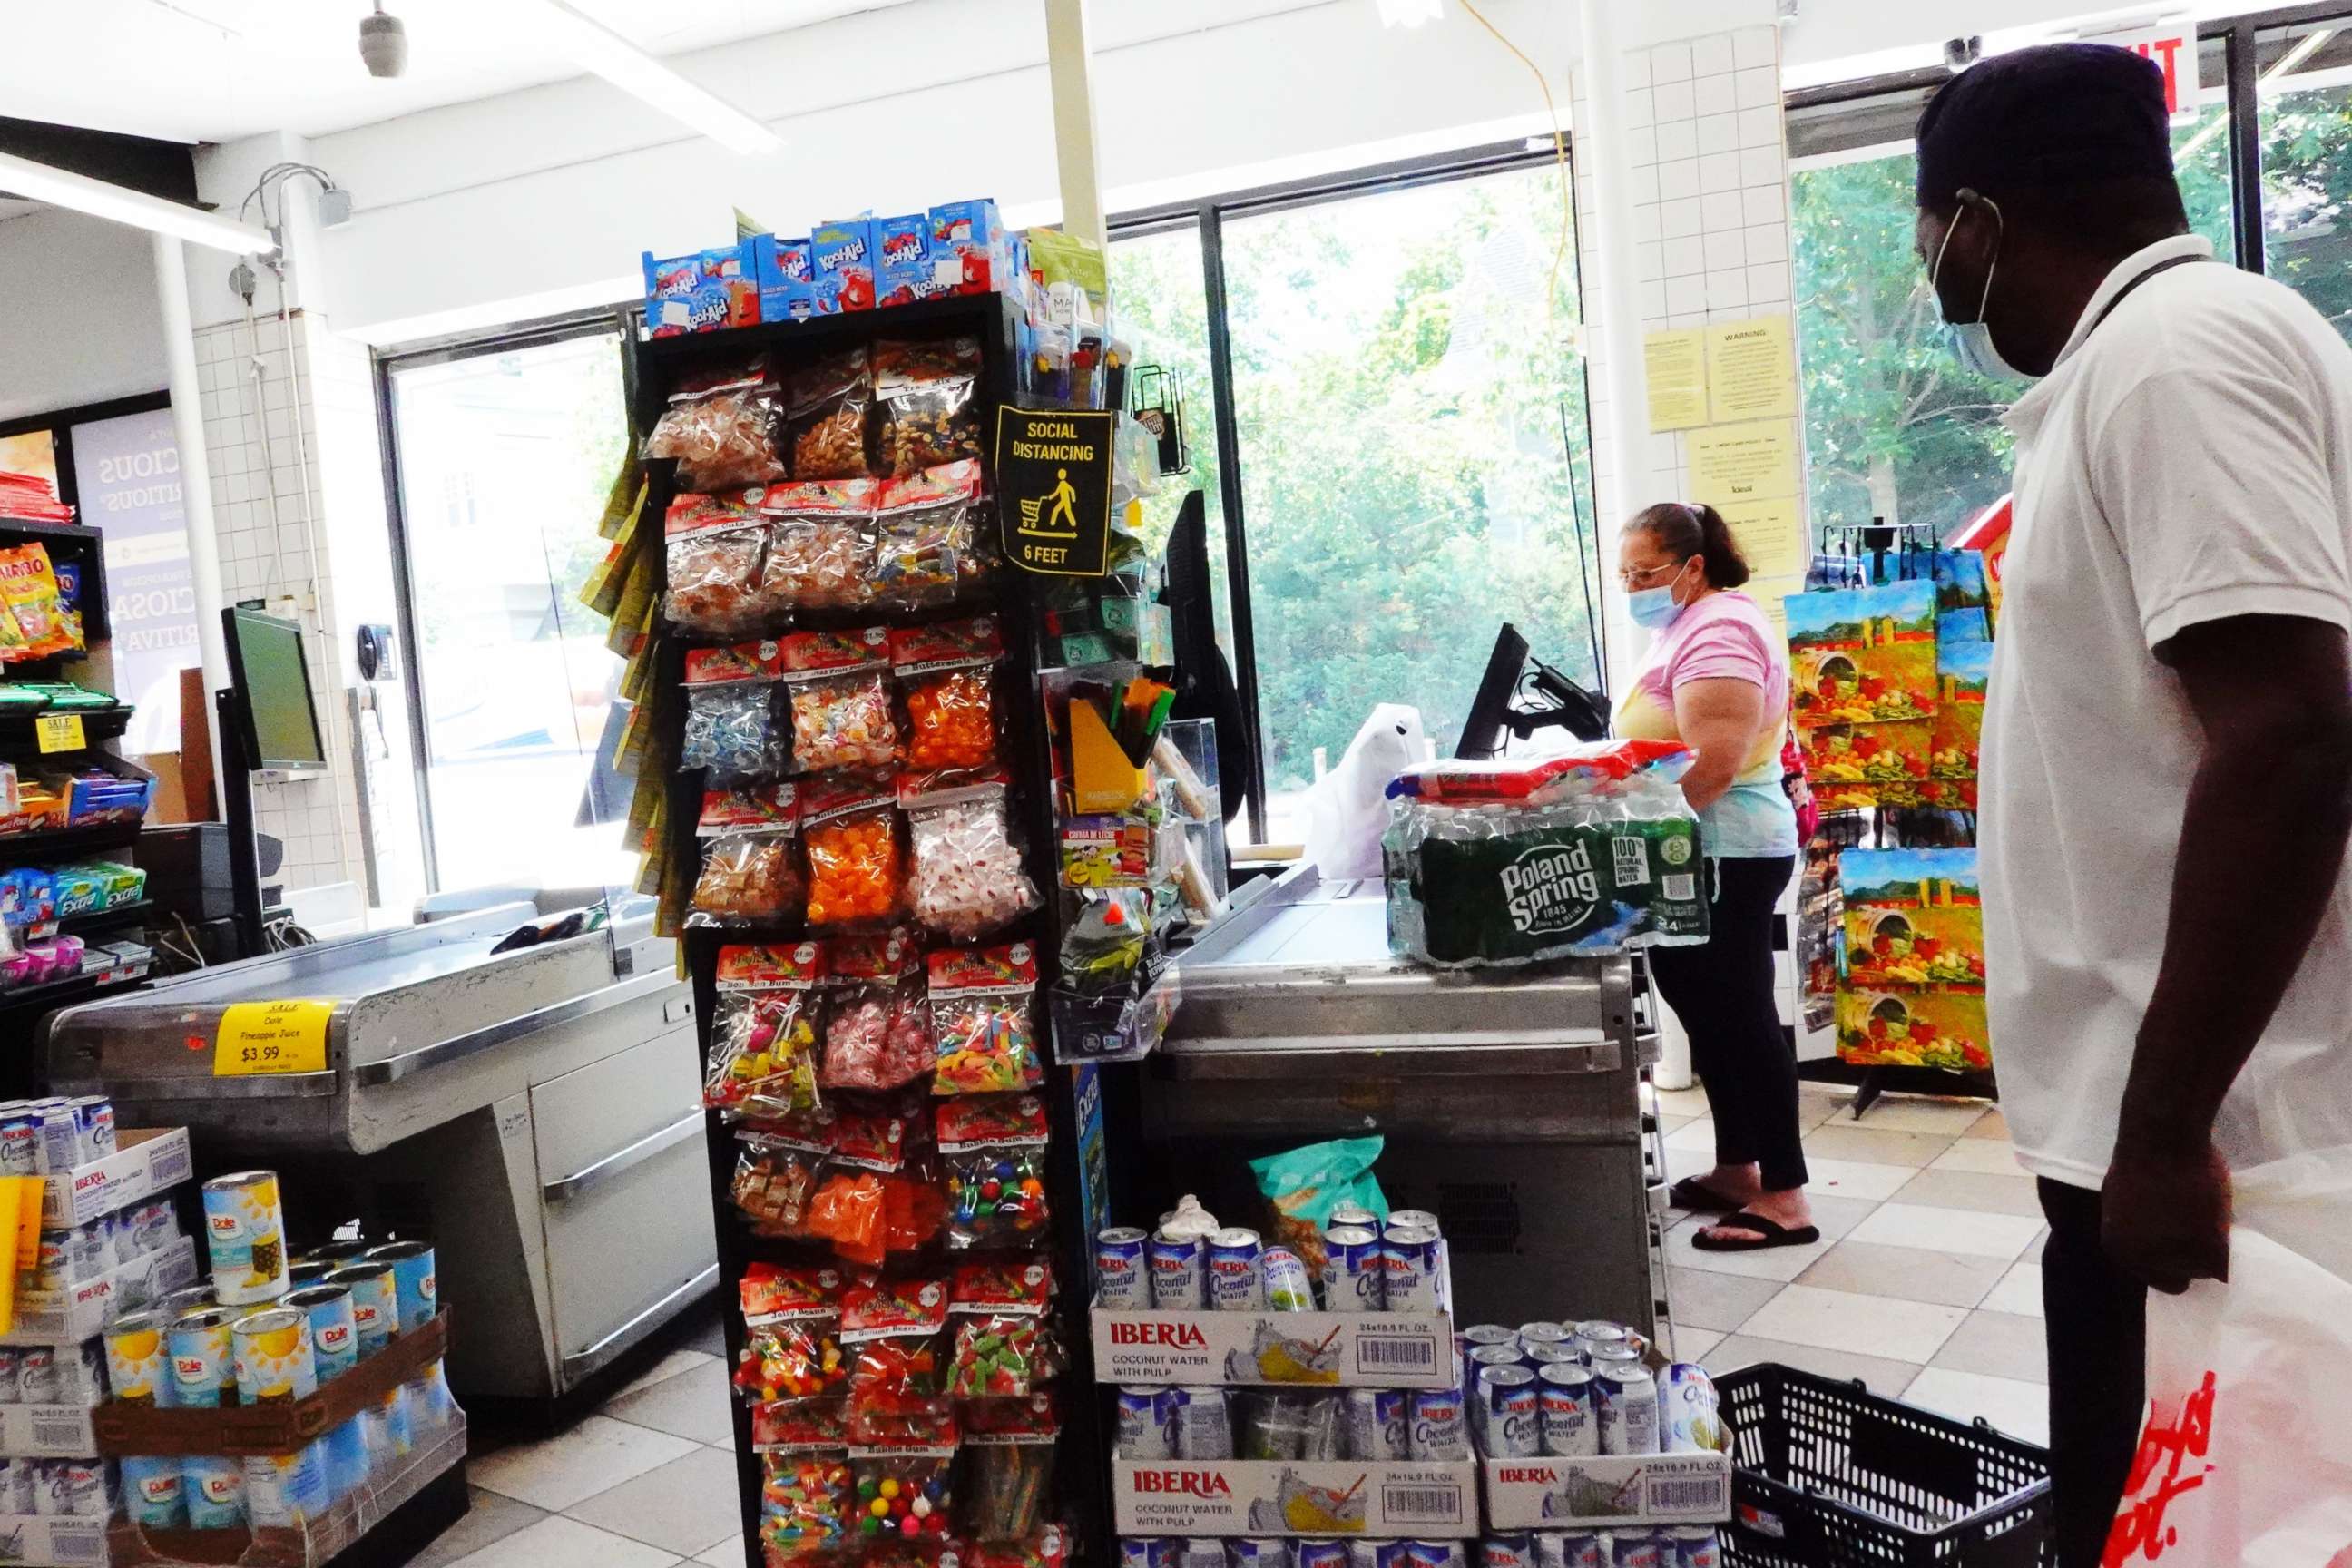 PHOTO: People prepare to check out their items at Ideal Fresh Market of Church Ave on June 10, 2022 in the Flatbush neighborhood of Brooklyn in New York City.